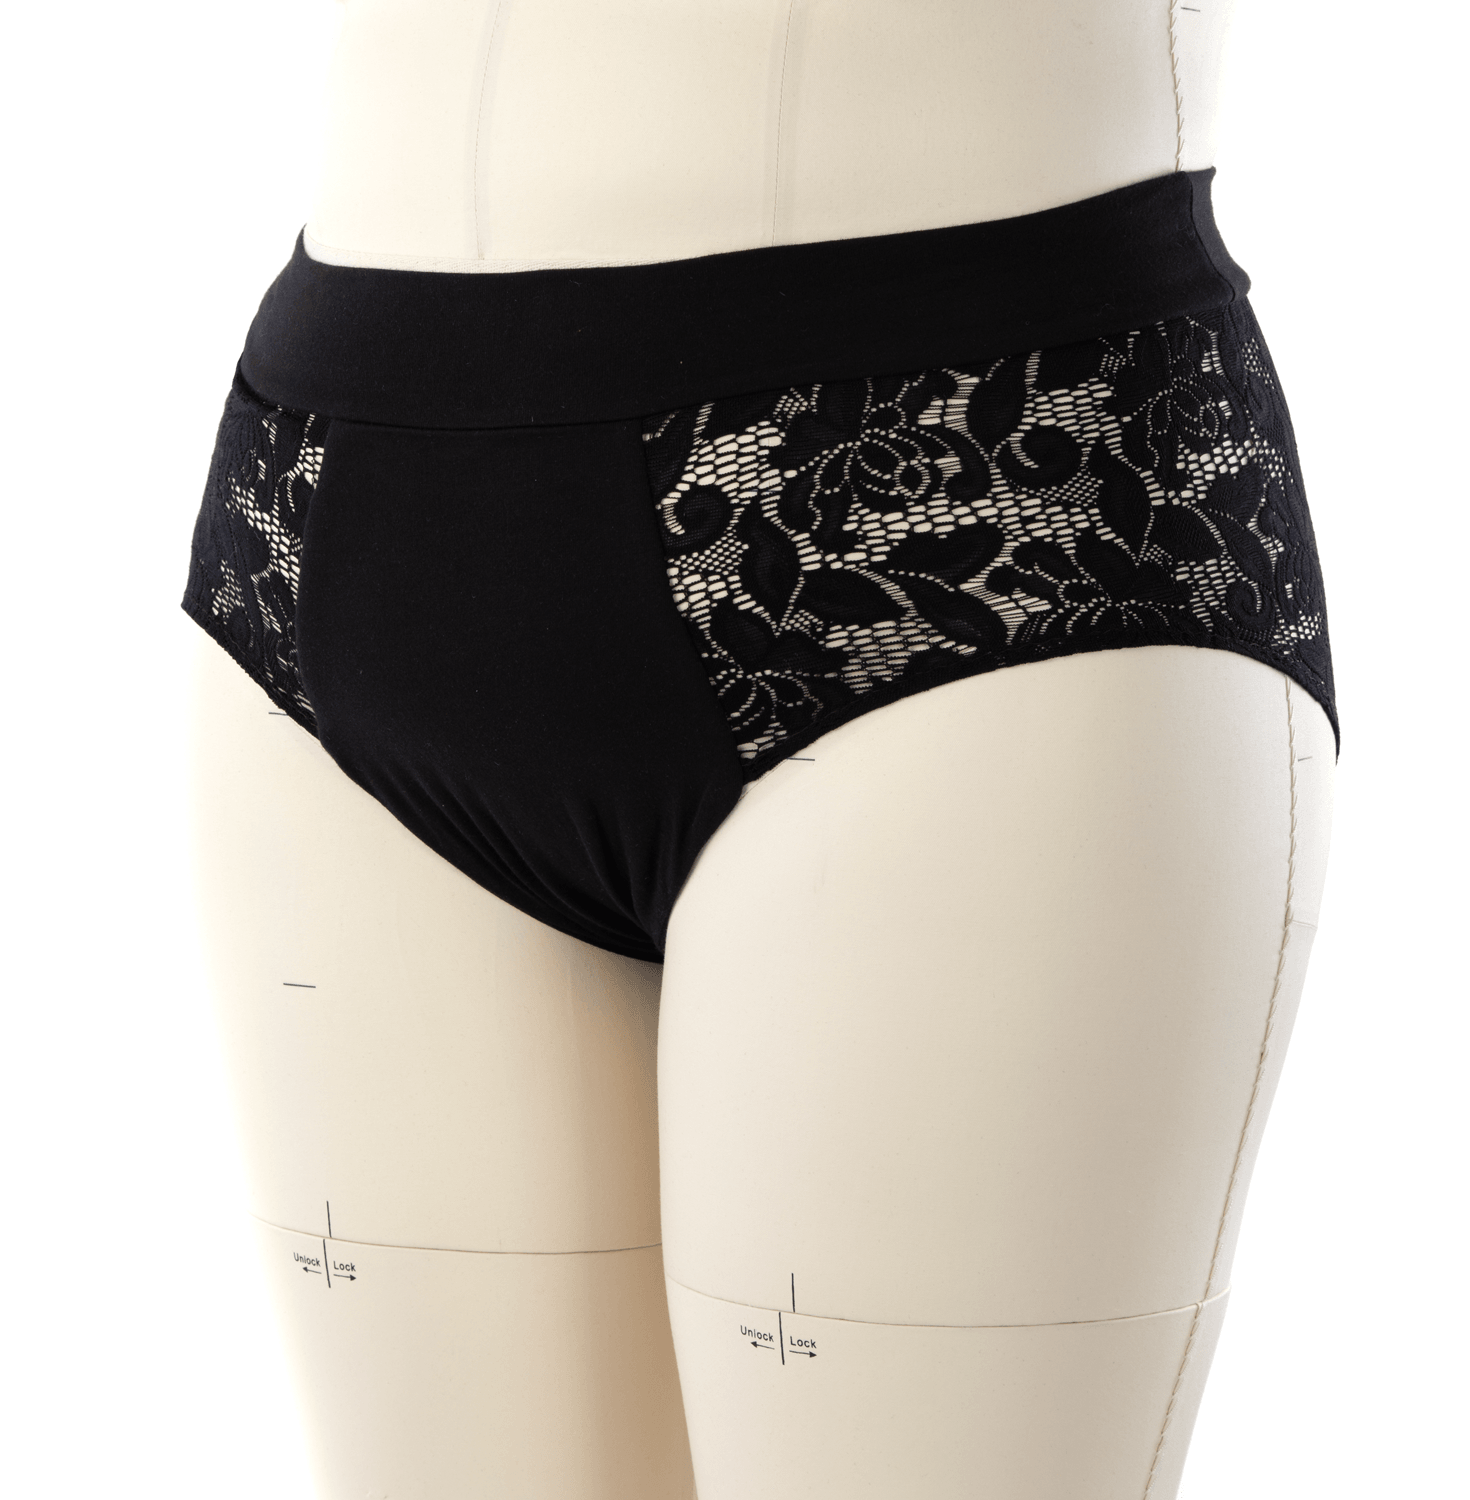 Period underwear with waistband option, stretch lace sides